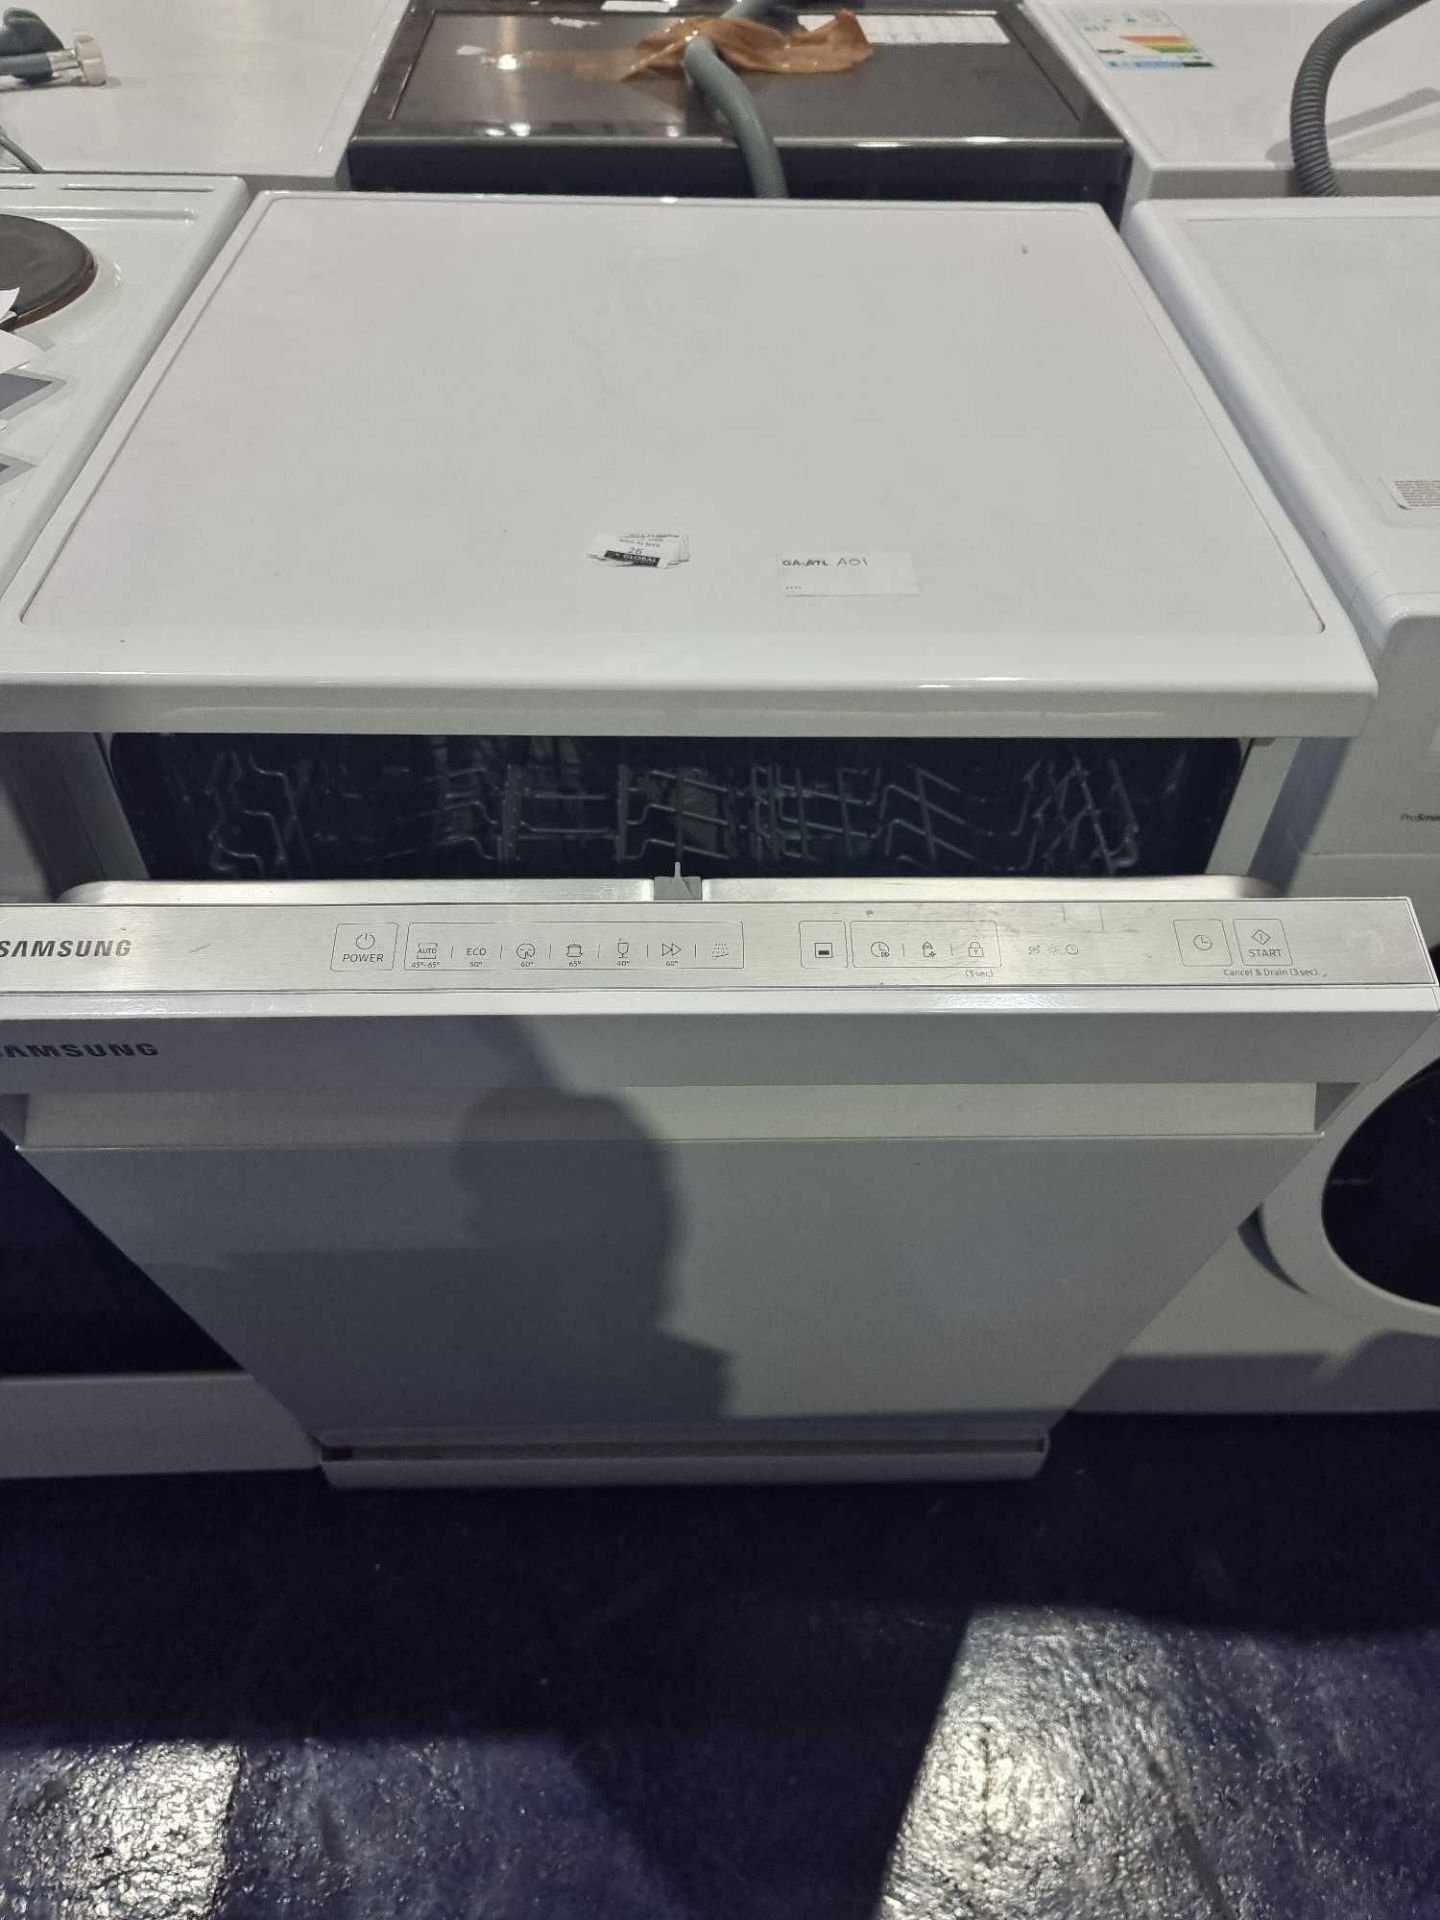 (Kw) RRP £600, Lot To Contain X1 Samsung Dishwasher, Unboxed - Image 4 of 4